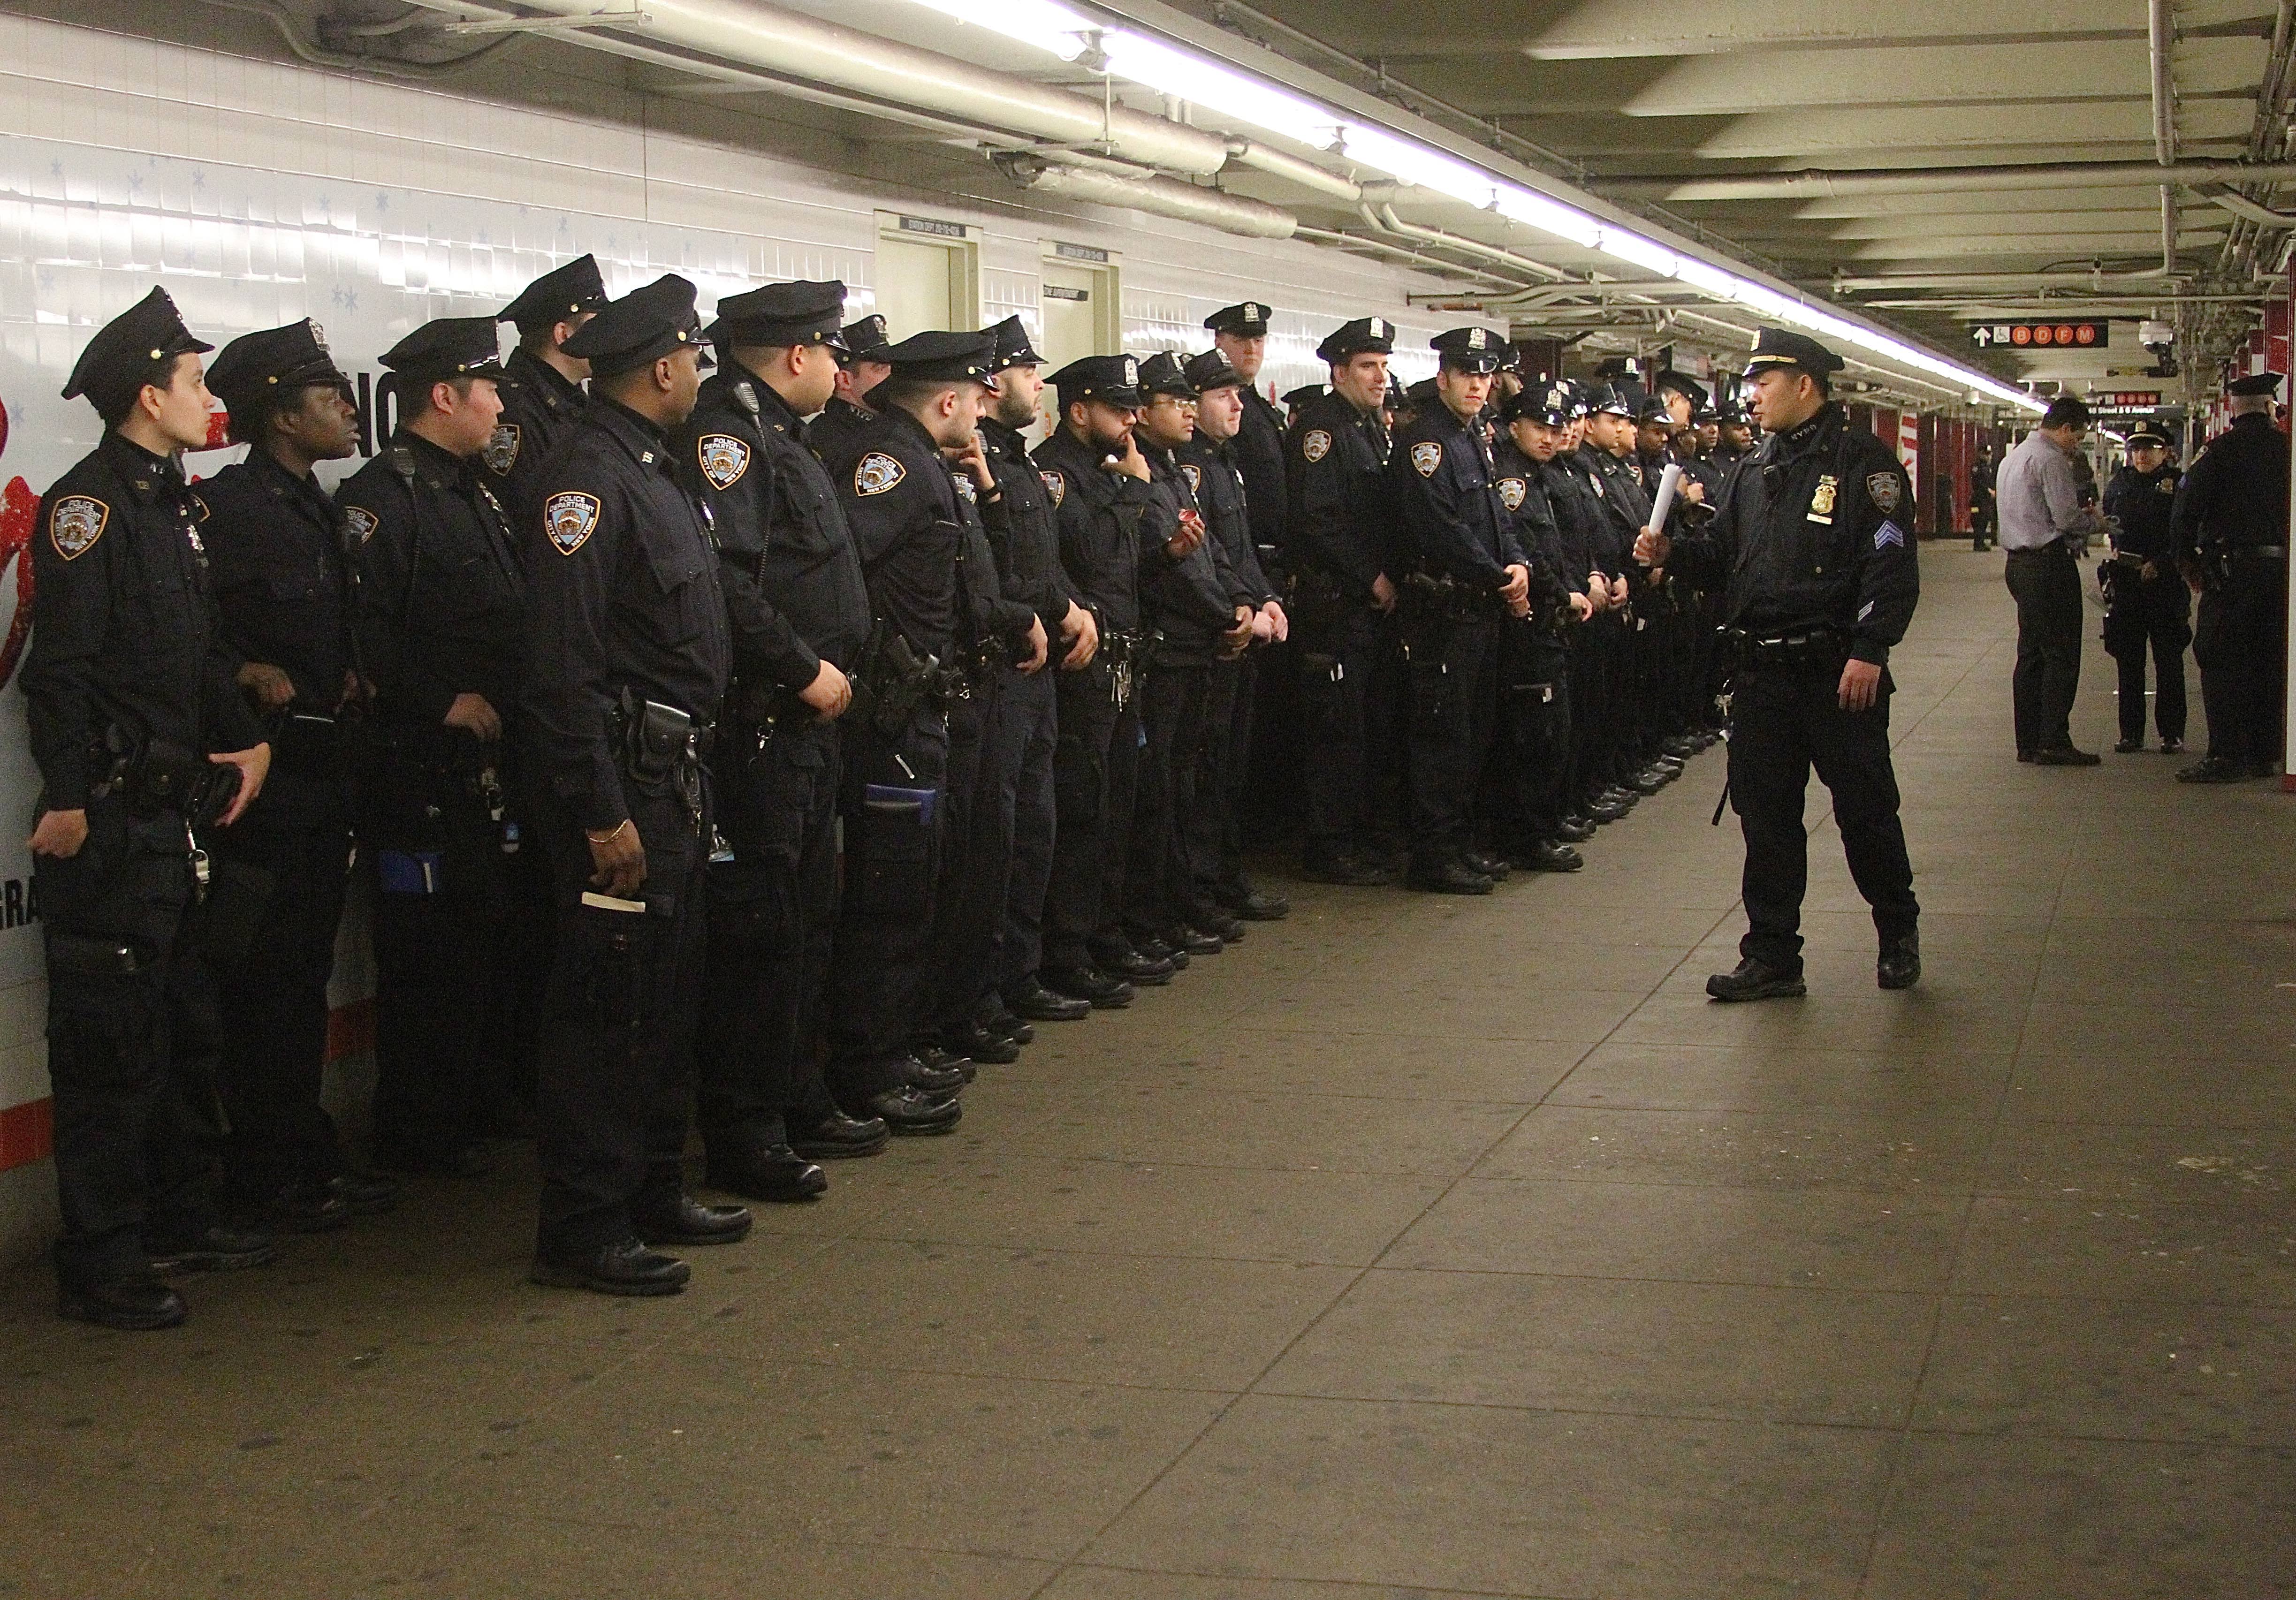 Scores of NYPD Officers at Rockefeller Center Station in NYC